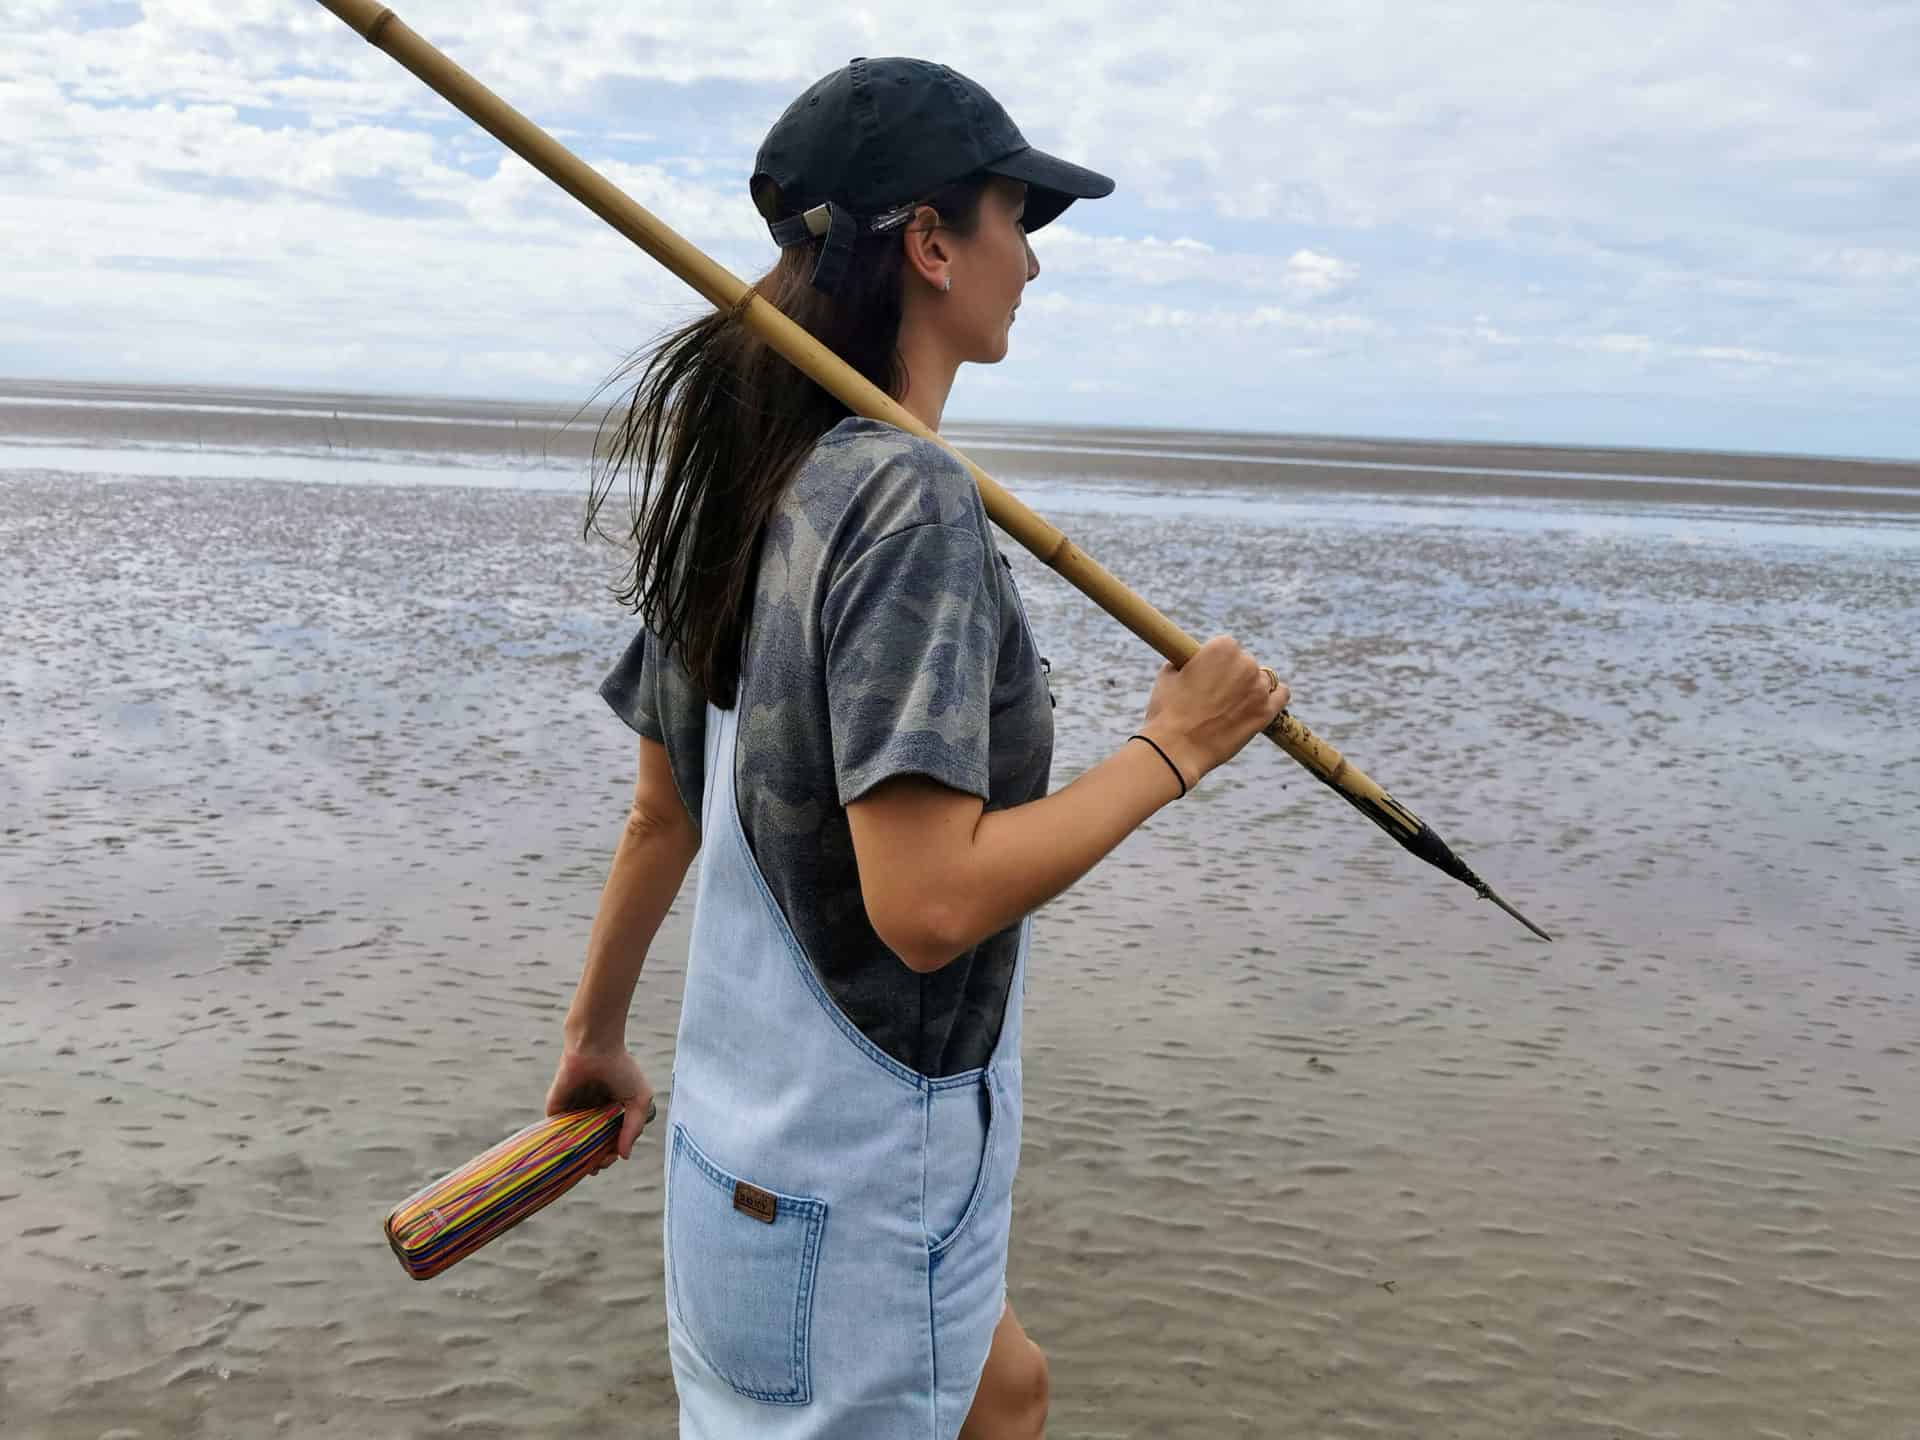 Spearfishing for mud crabs at Cooya Beach with Walkabout Cultural Adventures // Travel Mermaid